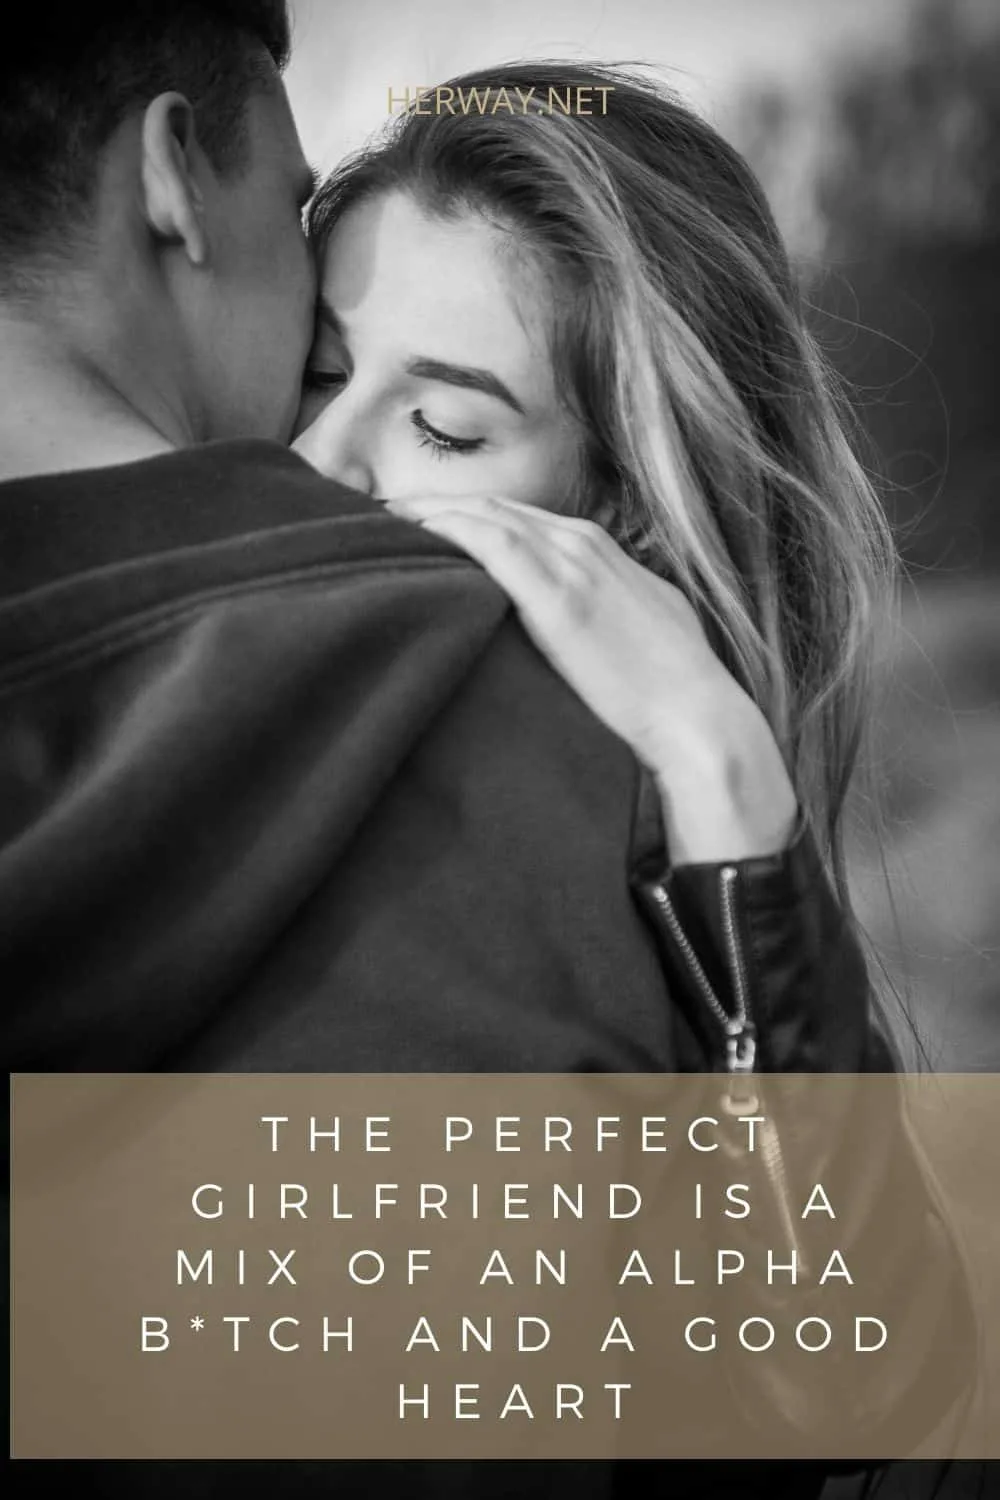 THE PERFECT GIRLFRIEND IS A MIX OF AN ALPHA B*TCH AND A GOOD HEART